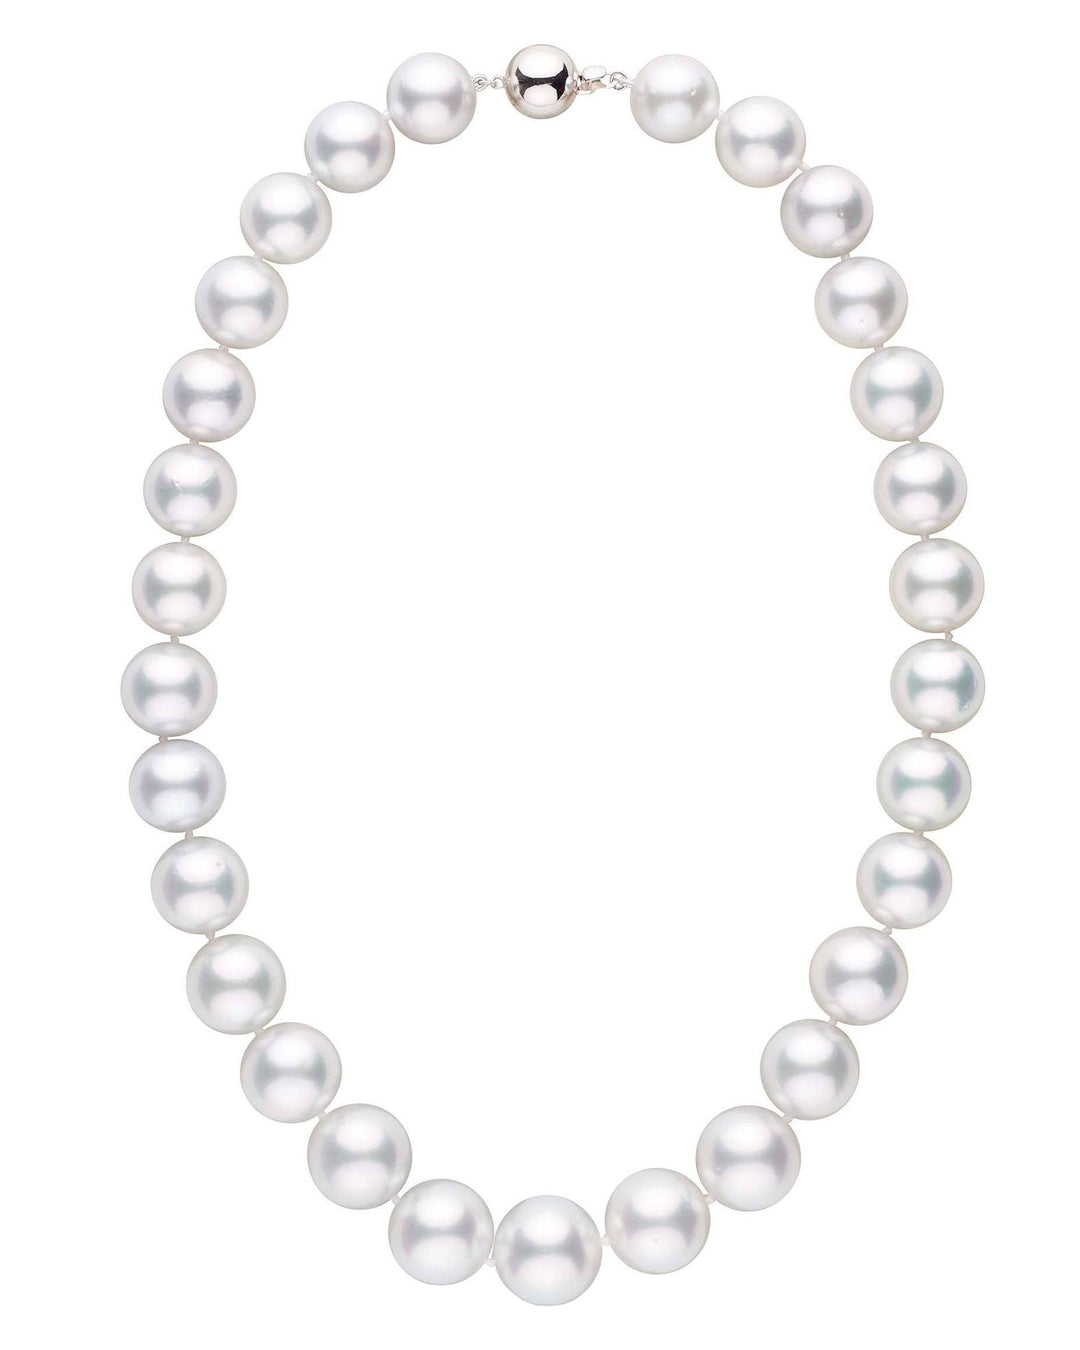 Large, round South Sea pearl necklace